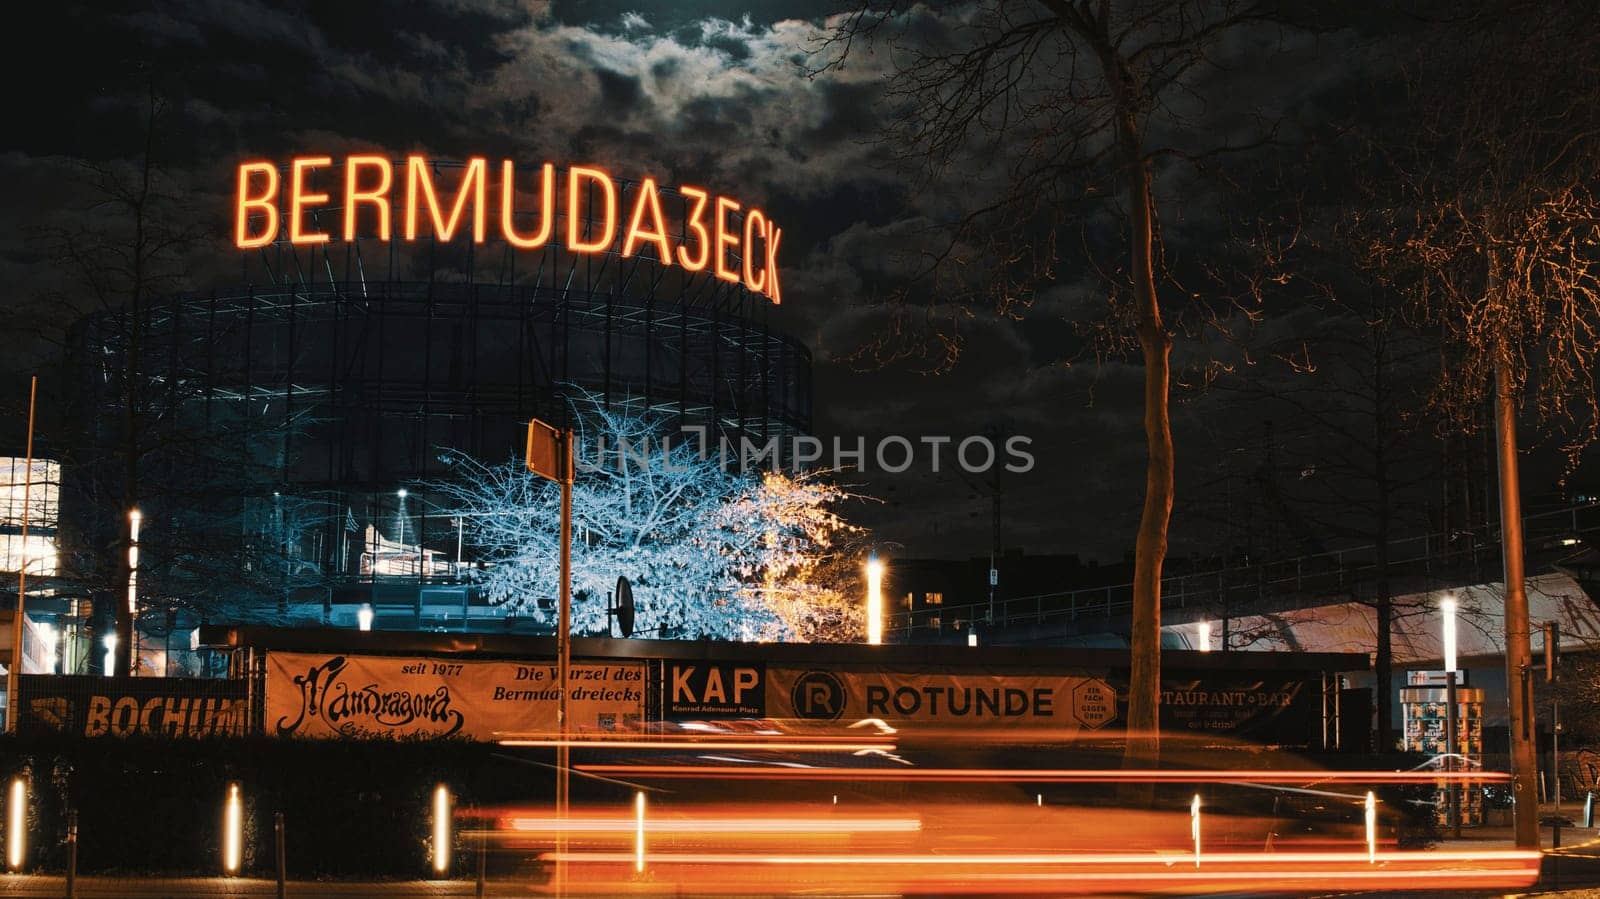 Low angle shot of an illuminated sign of the Bermuda3eck, Bermuda Triangle, in Bochum, Germany by rherrmannde